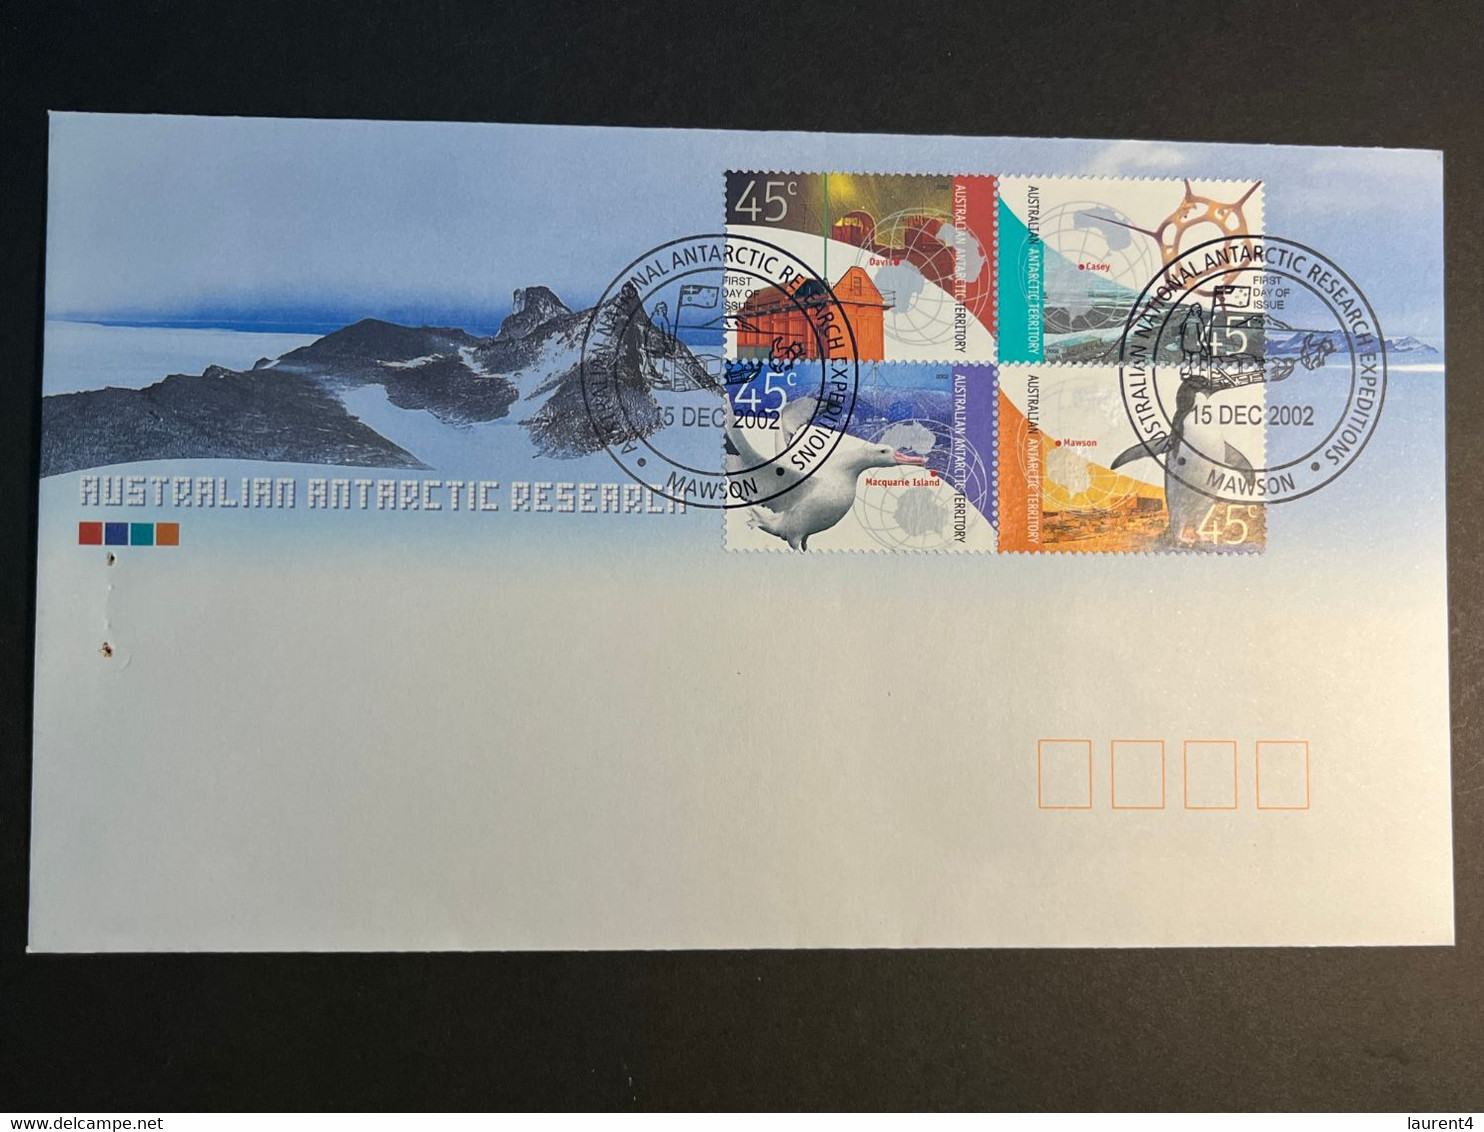 (4 N 32) Australia FDC (1 Cover) - AAT Research 2002 - FDC